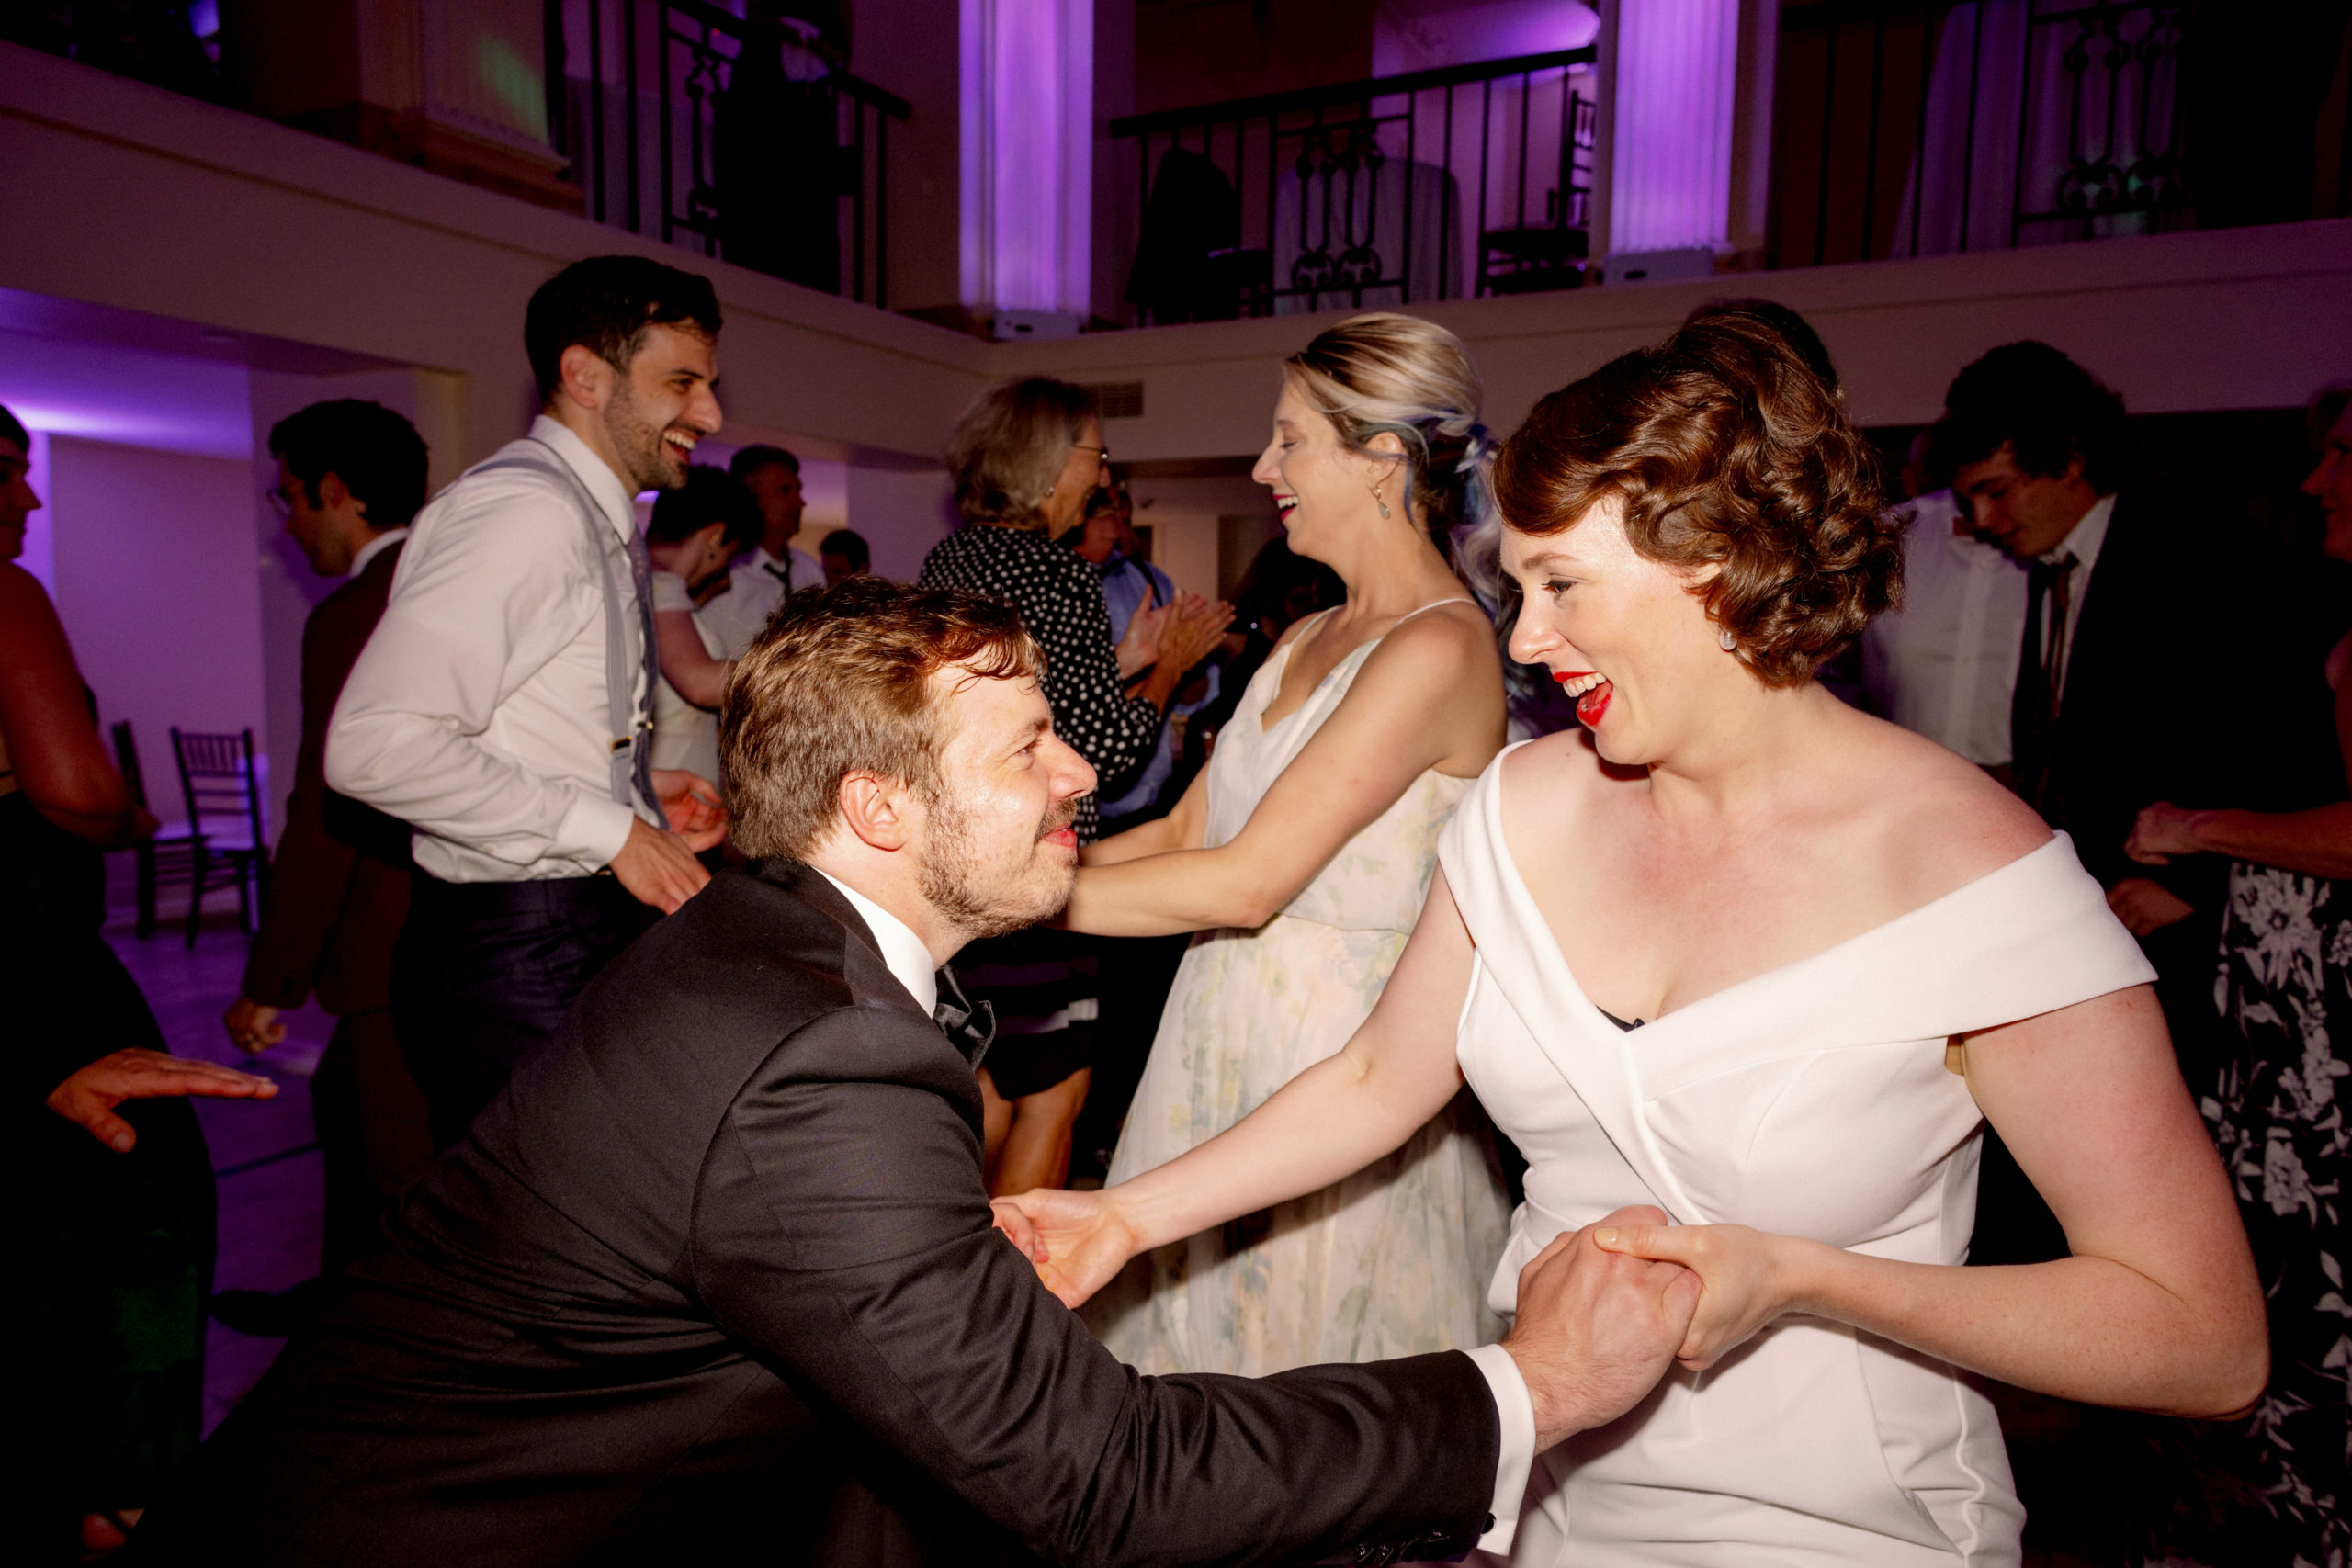 The newly-weds and guests are dancing the night away. Wedding day photo timeline image by Jenny Fu Studio.